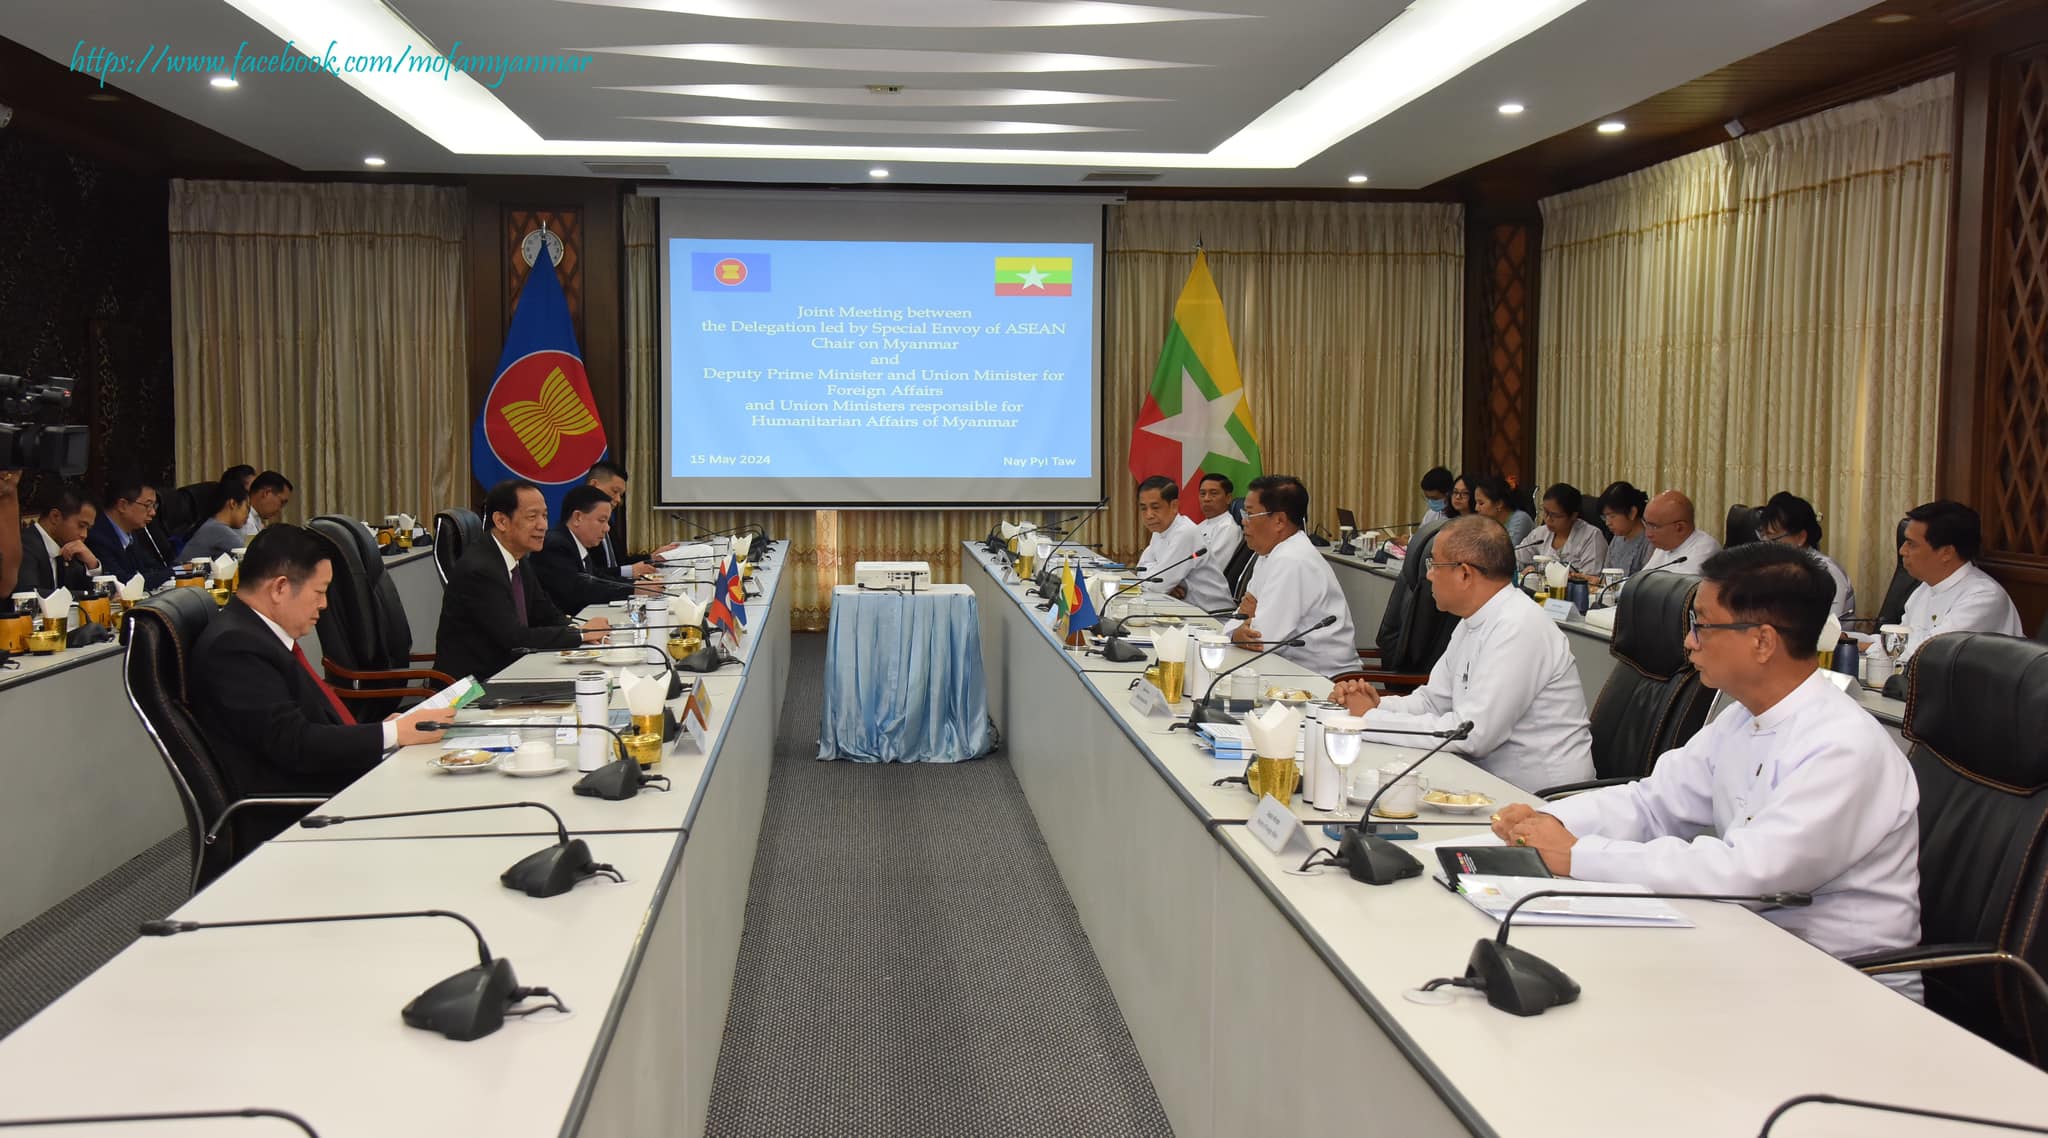 Joint Meeting between Myanmar Delegation led by Deputy Prime Minister and Union Minister for Foreign Affairs and Delegation led by Special Envoy of ASEAN Chair on Myanmar held in Nay Pyi Taw (15-5-2024)